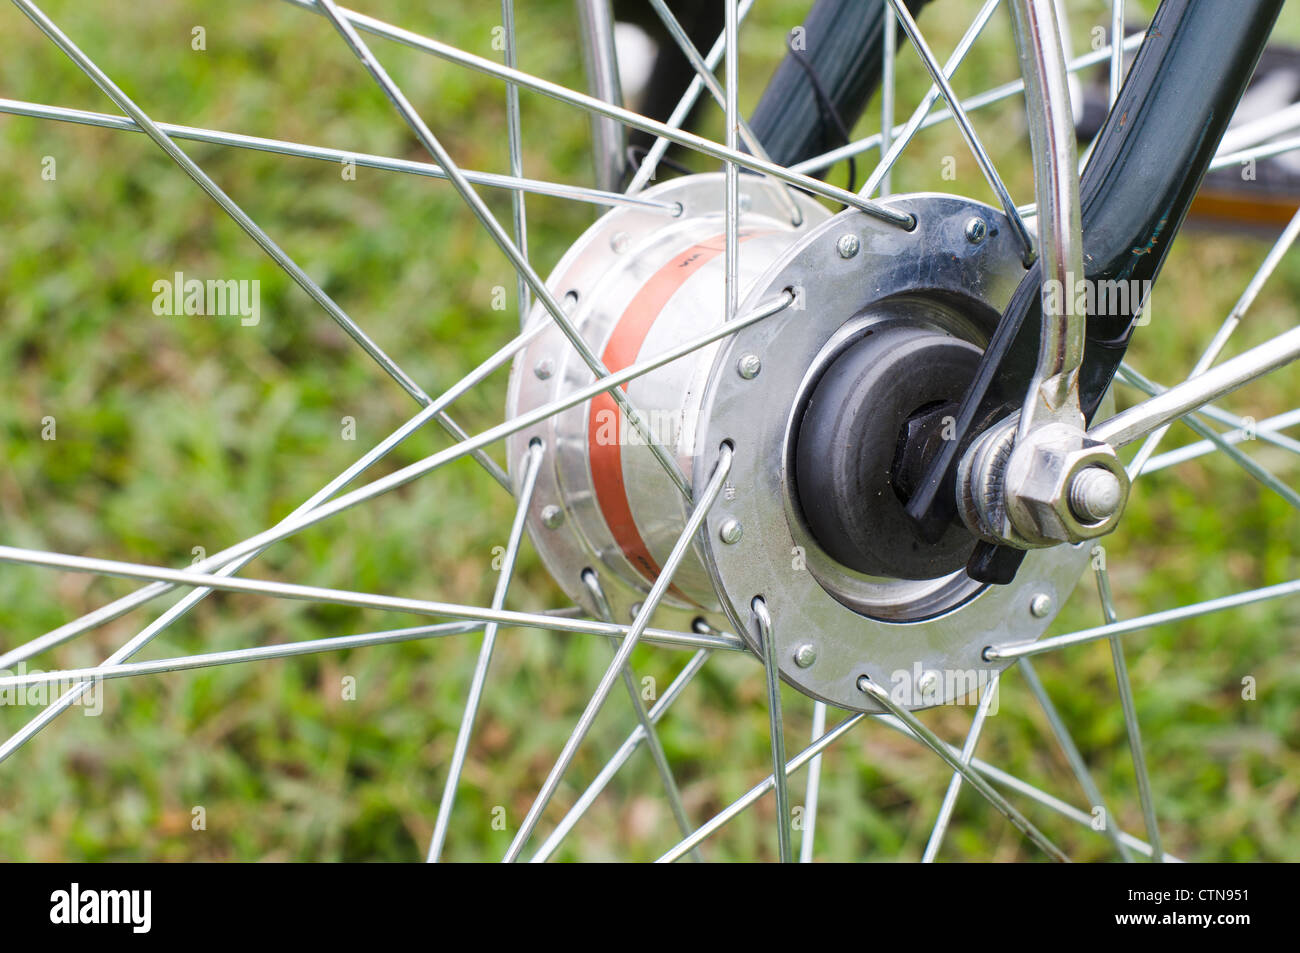 close up look of a hub dynamo of a bike, to generate electricity for bike lighting. Stock Photo